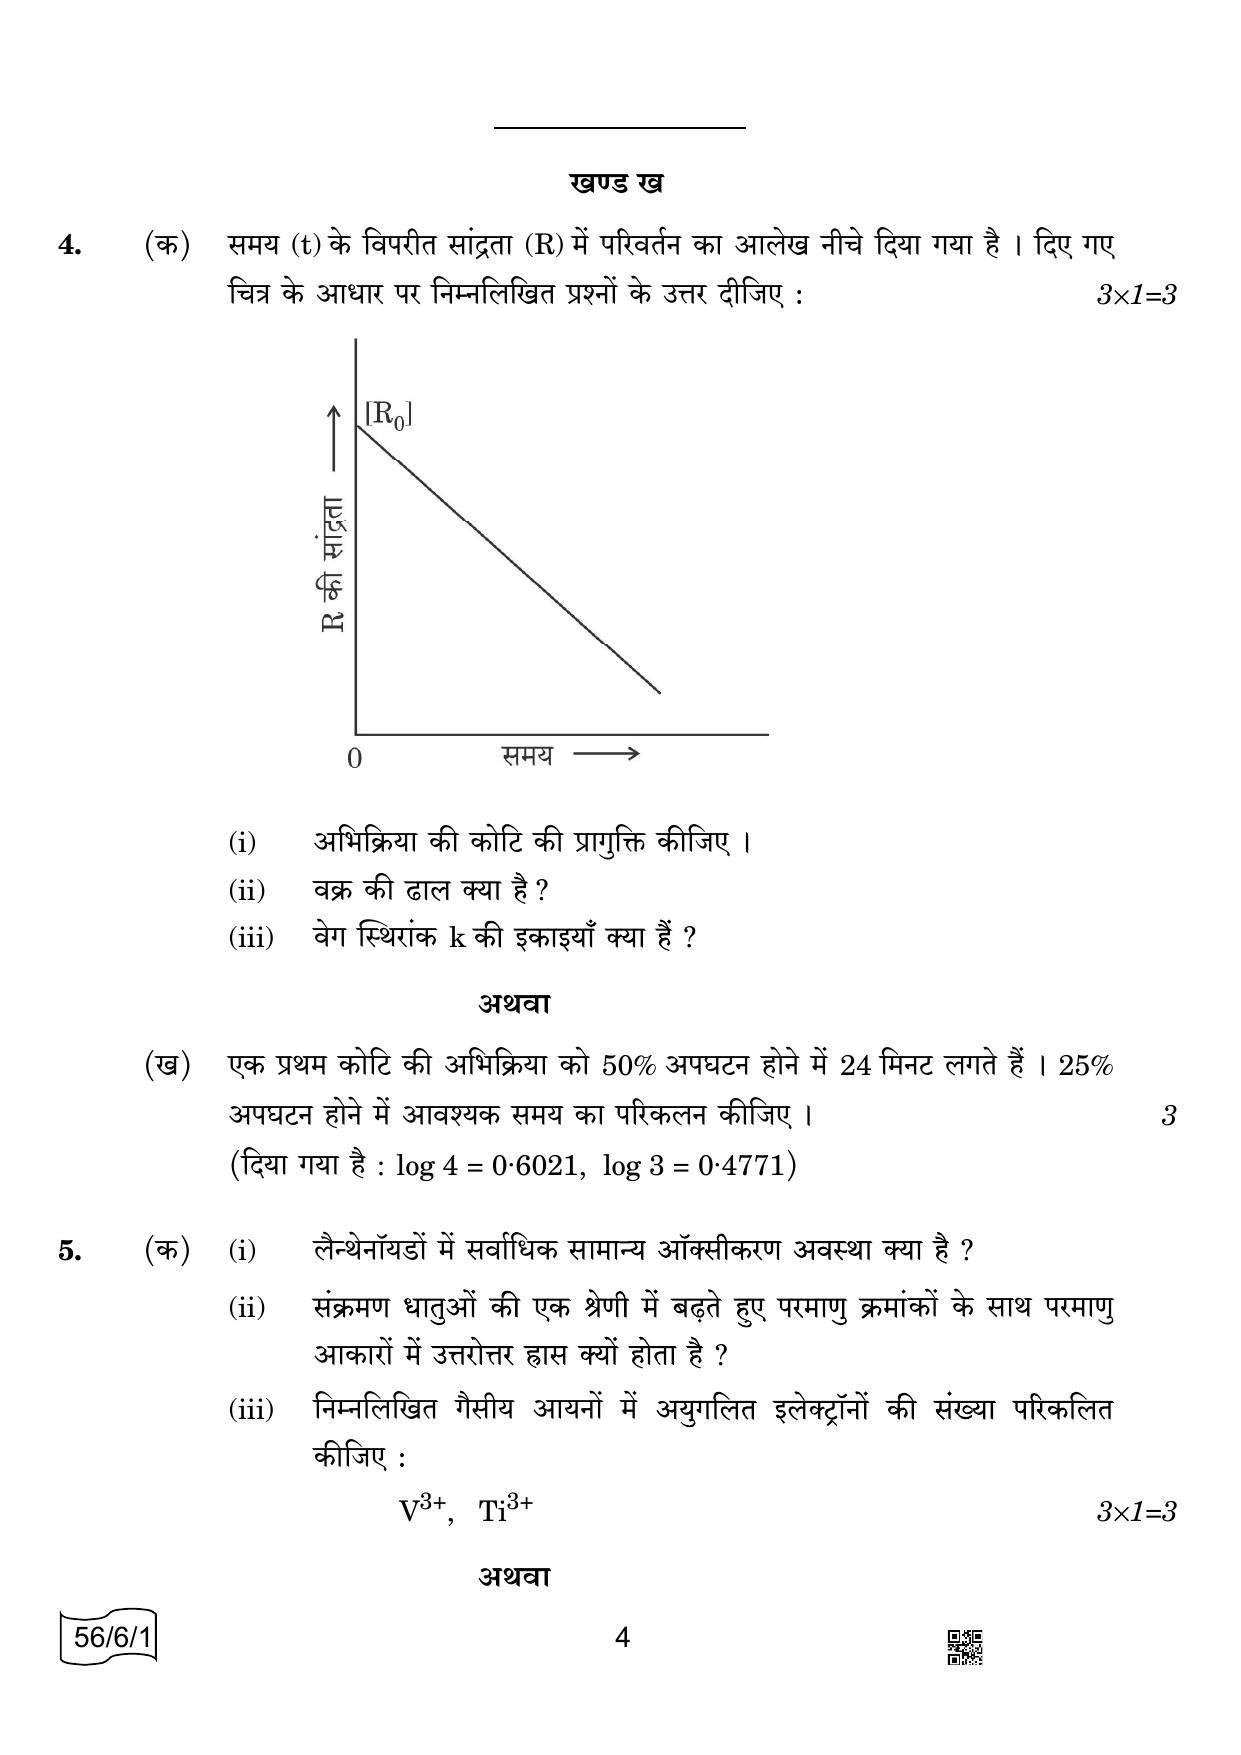 CBSE Class 12 56-6-1 CHEMISTRY 2022 Compartment Question Paper - Page 4